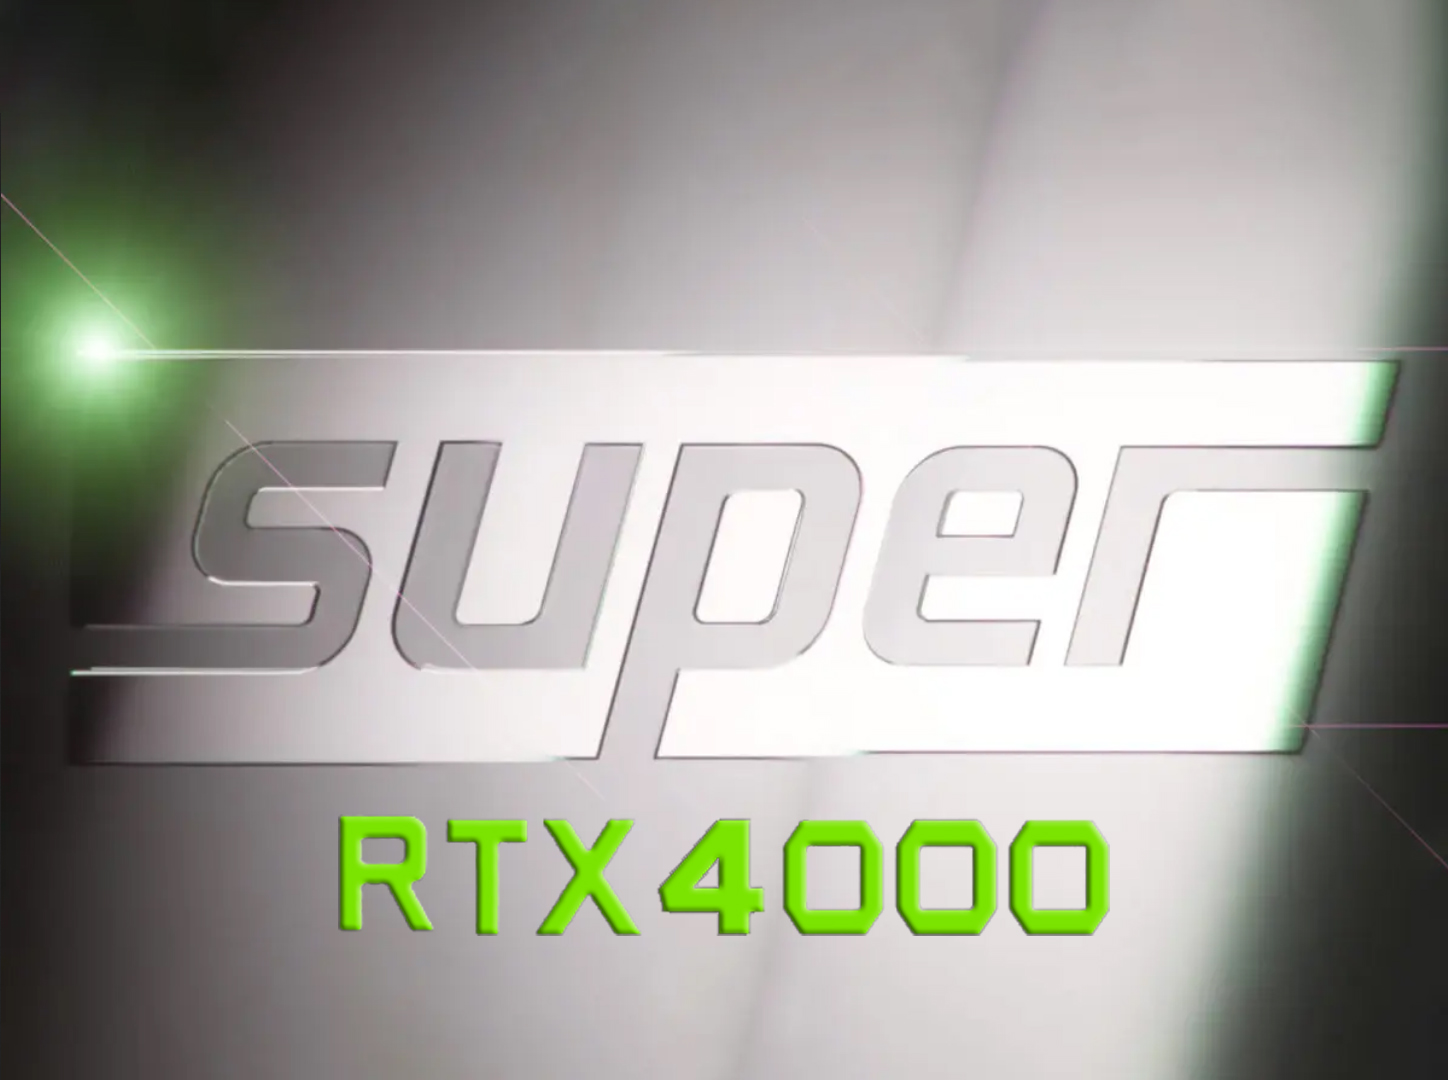 CES: NVIDIA GeForce RTX 4070 Super, RTX 4070 Ti Super and RTX 4080 are now  official - data and information